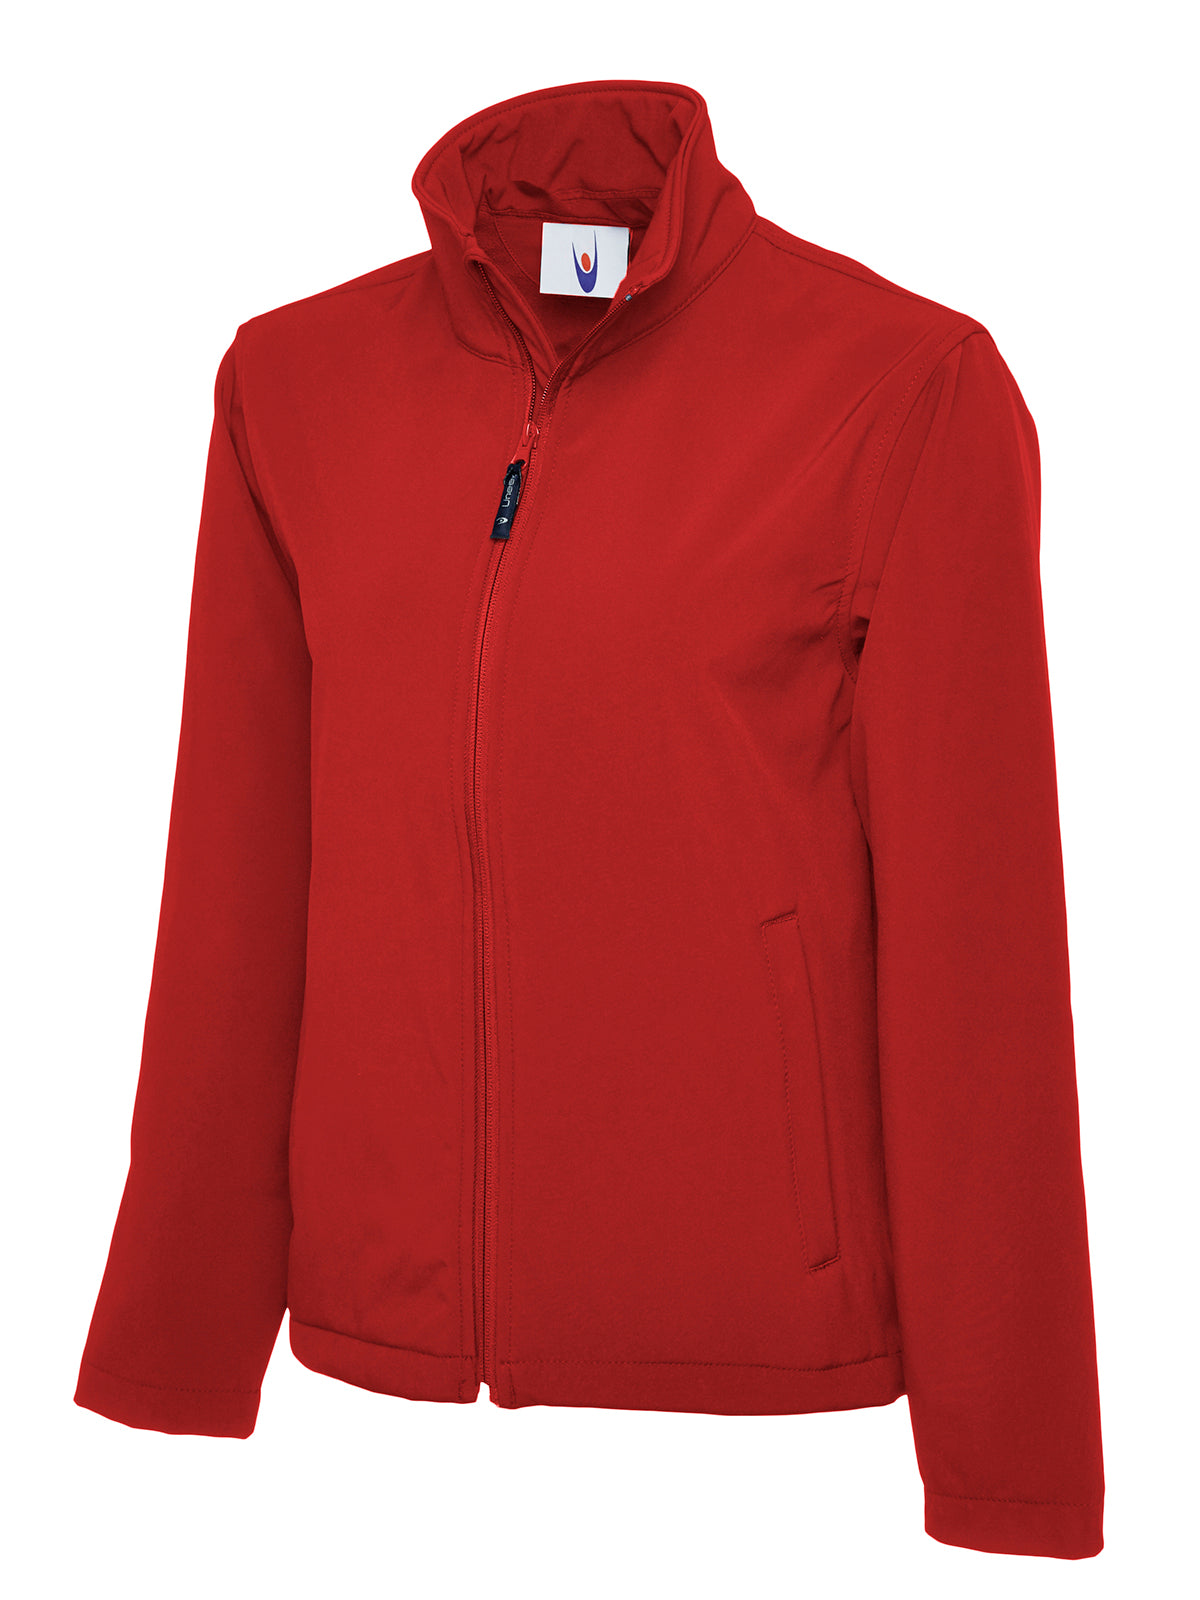 Uneek Classic Full Zip Soft Shell Jacket UC612 - Red